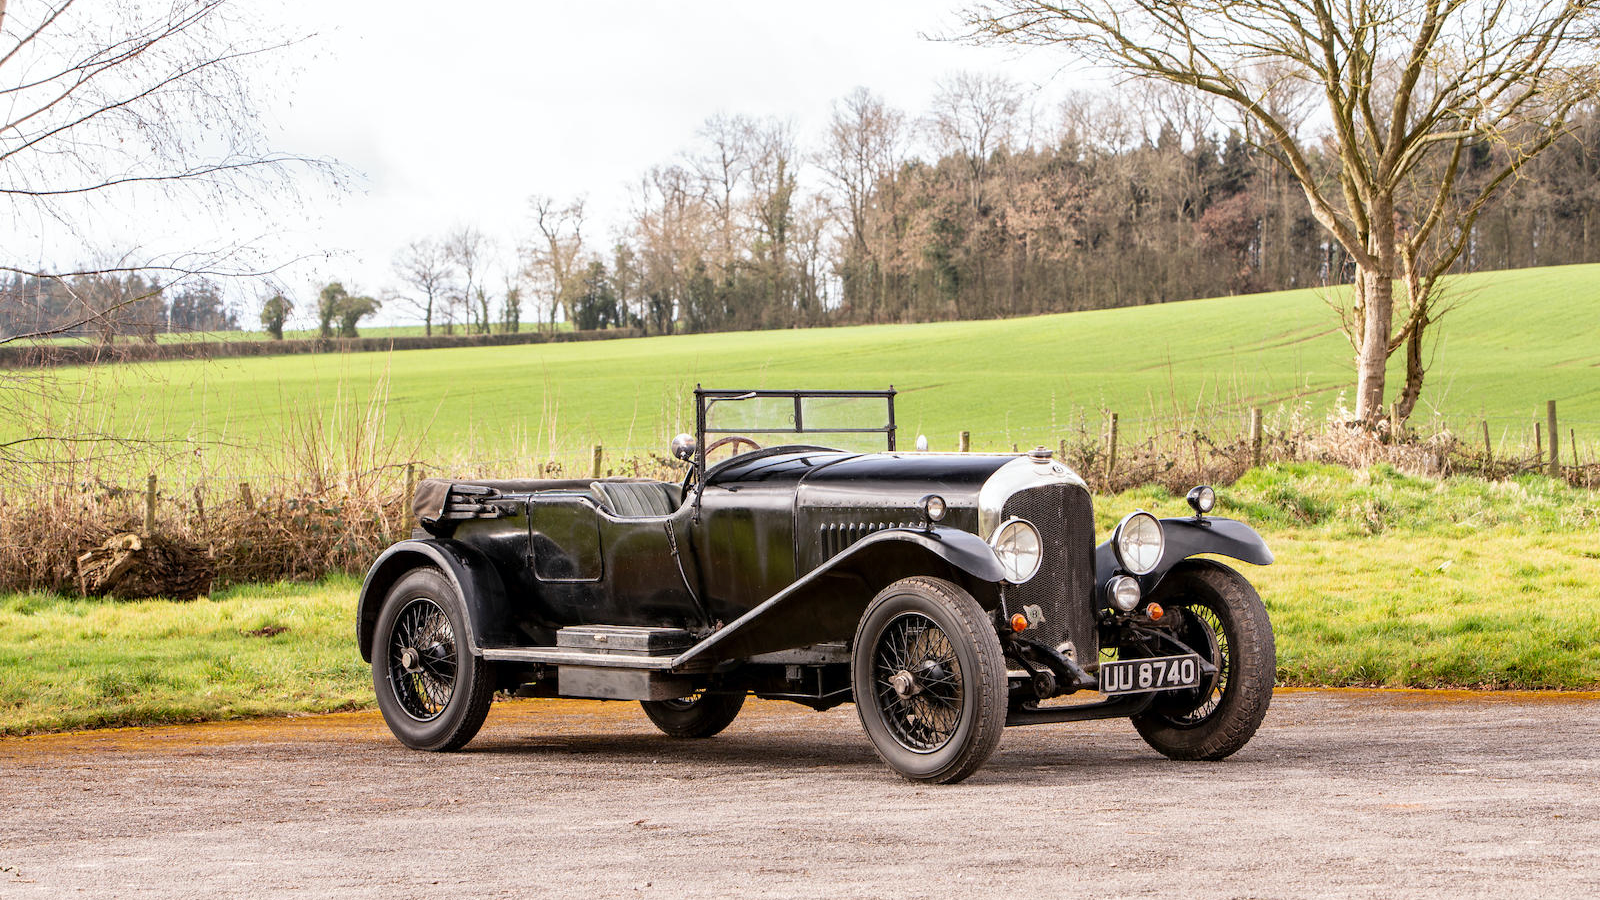 These stunning classics will be sold at the £10m Goodwood Members’ Meeting sale